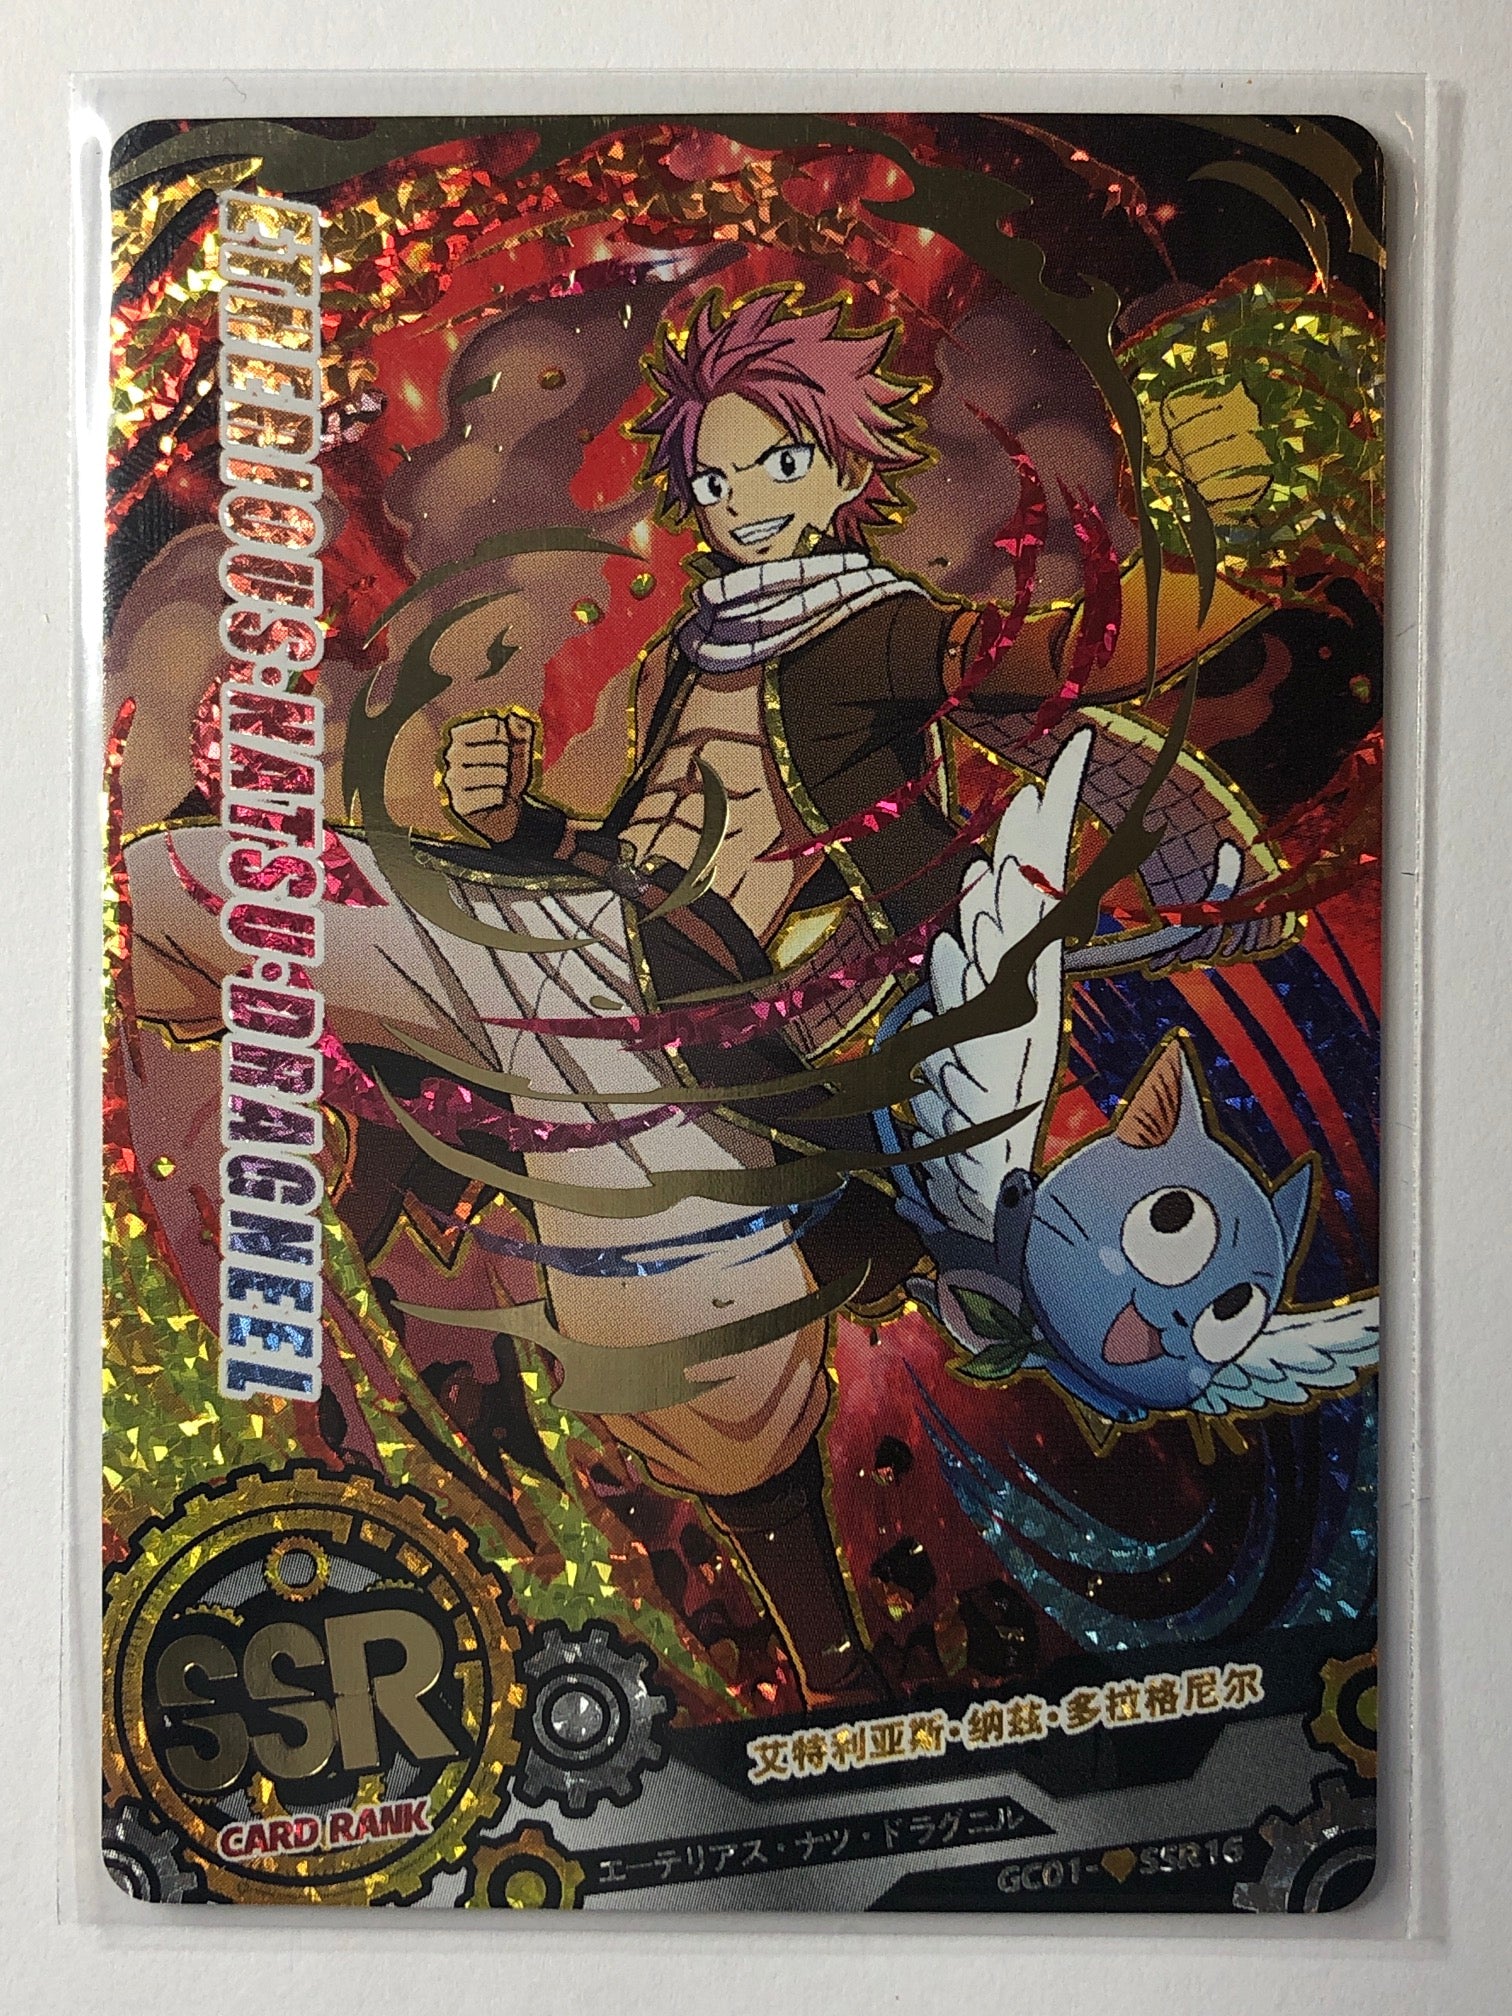 Etherious Natsu Dragneel - COG-GC01-SSR16 SSR - The Card of God GC01 (M/NM)